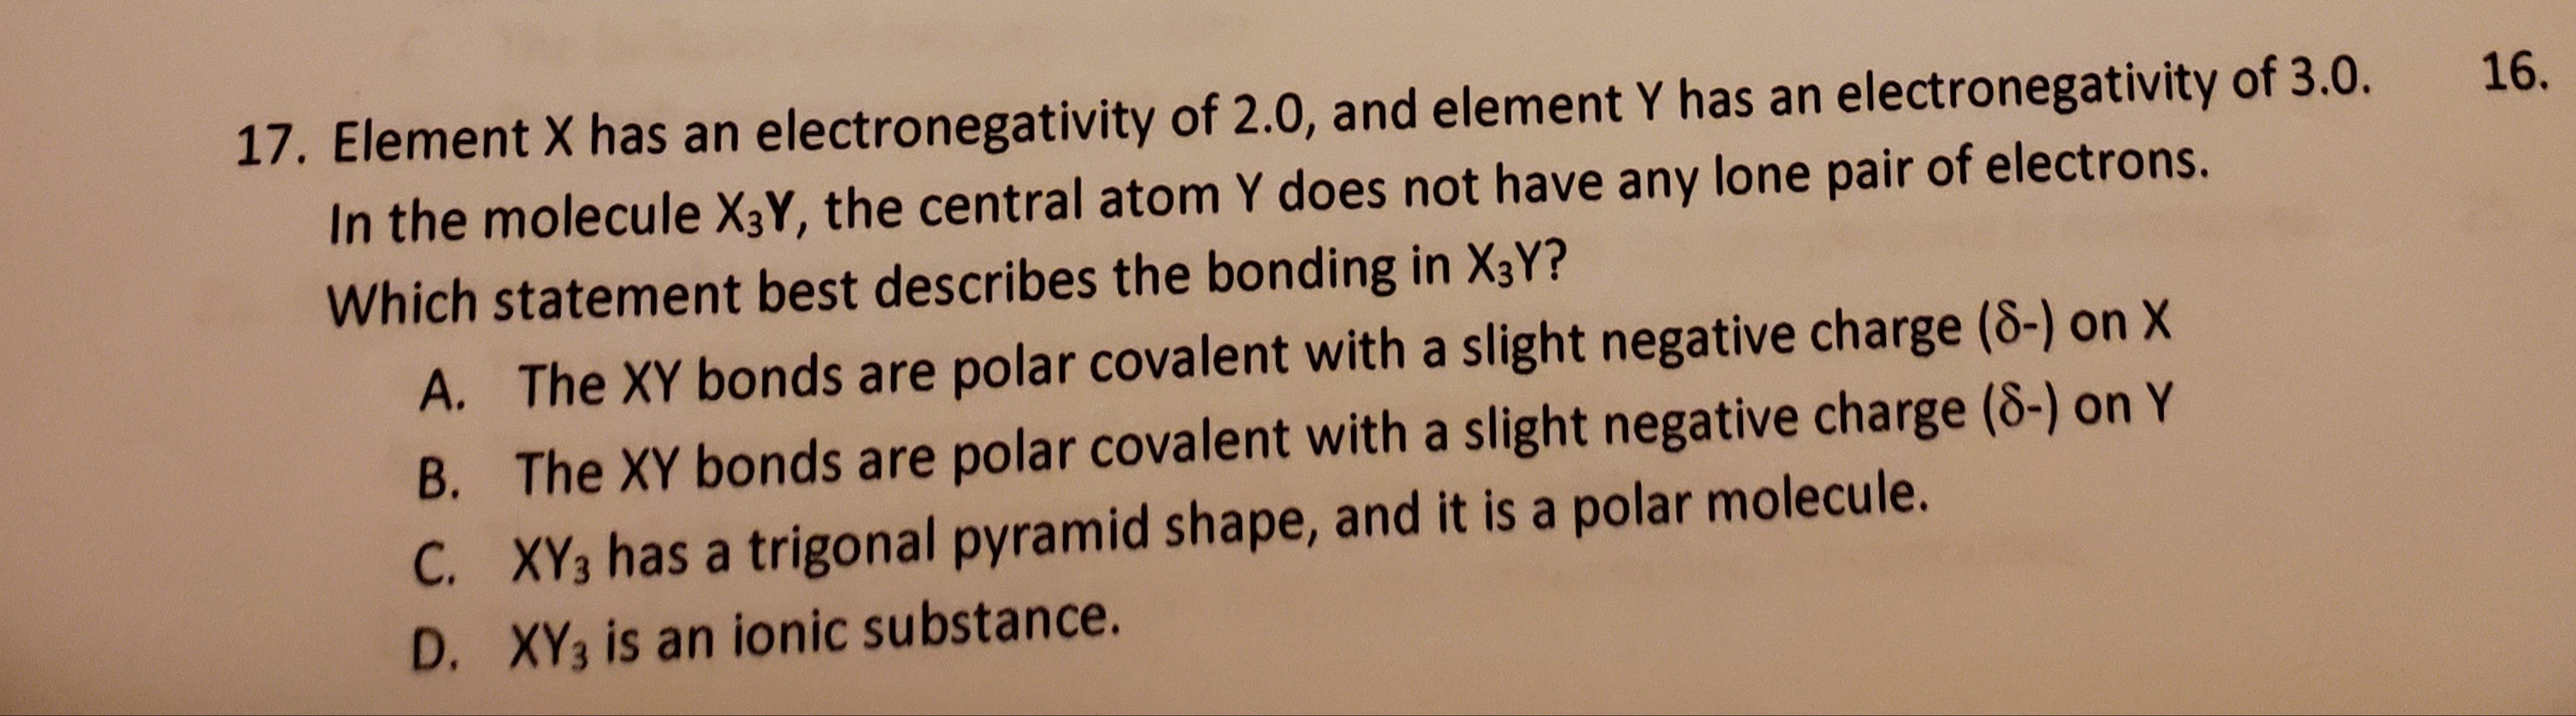 7. Element X has an electronegativity of 2.0, and element Y has an electronegativity of 3.0.
In the molecule X3Y, the central atom Y does not have any lone pair of electrons.
16.
Which statement best describes the bonding in X3Y?
A. The XY bonds are polar covalent with a slight negative charge (8-) on X
B. The XY bonds are polar covalent with a slight negative charge (8-) on Y
C. XY3 has a trigonal pyramid shape, and it is a polar molecule.
D. XY3 is an ionic substance.
